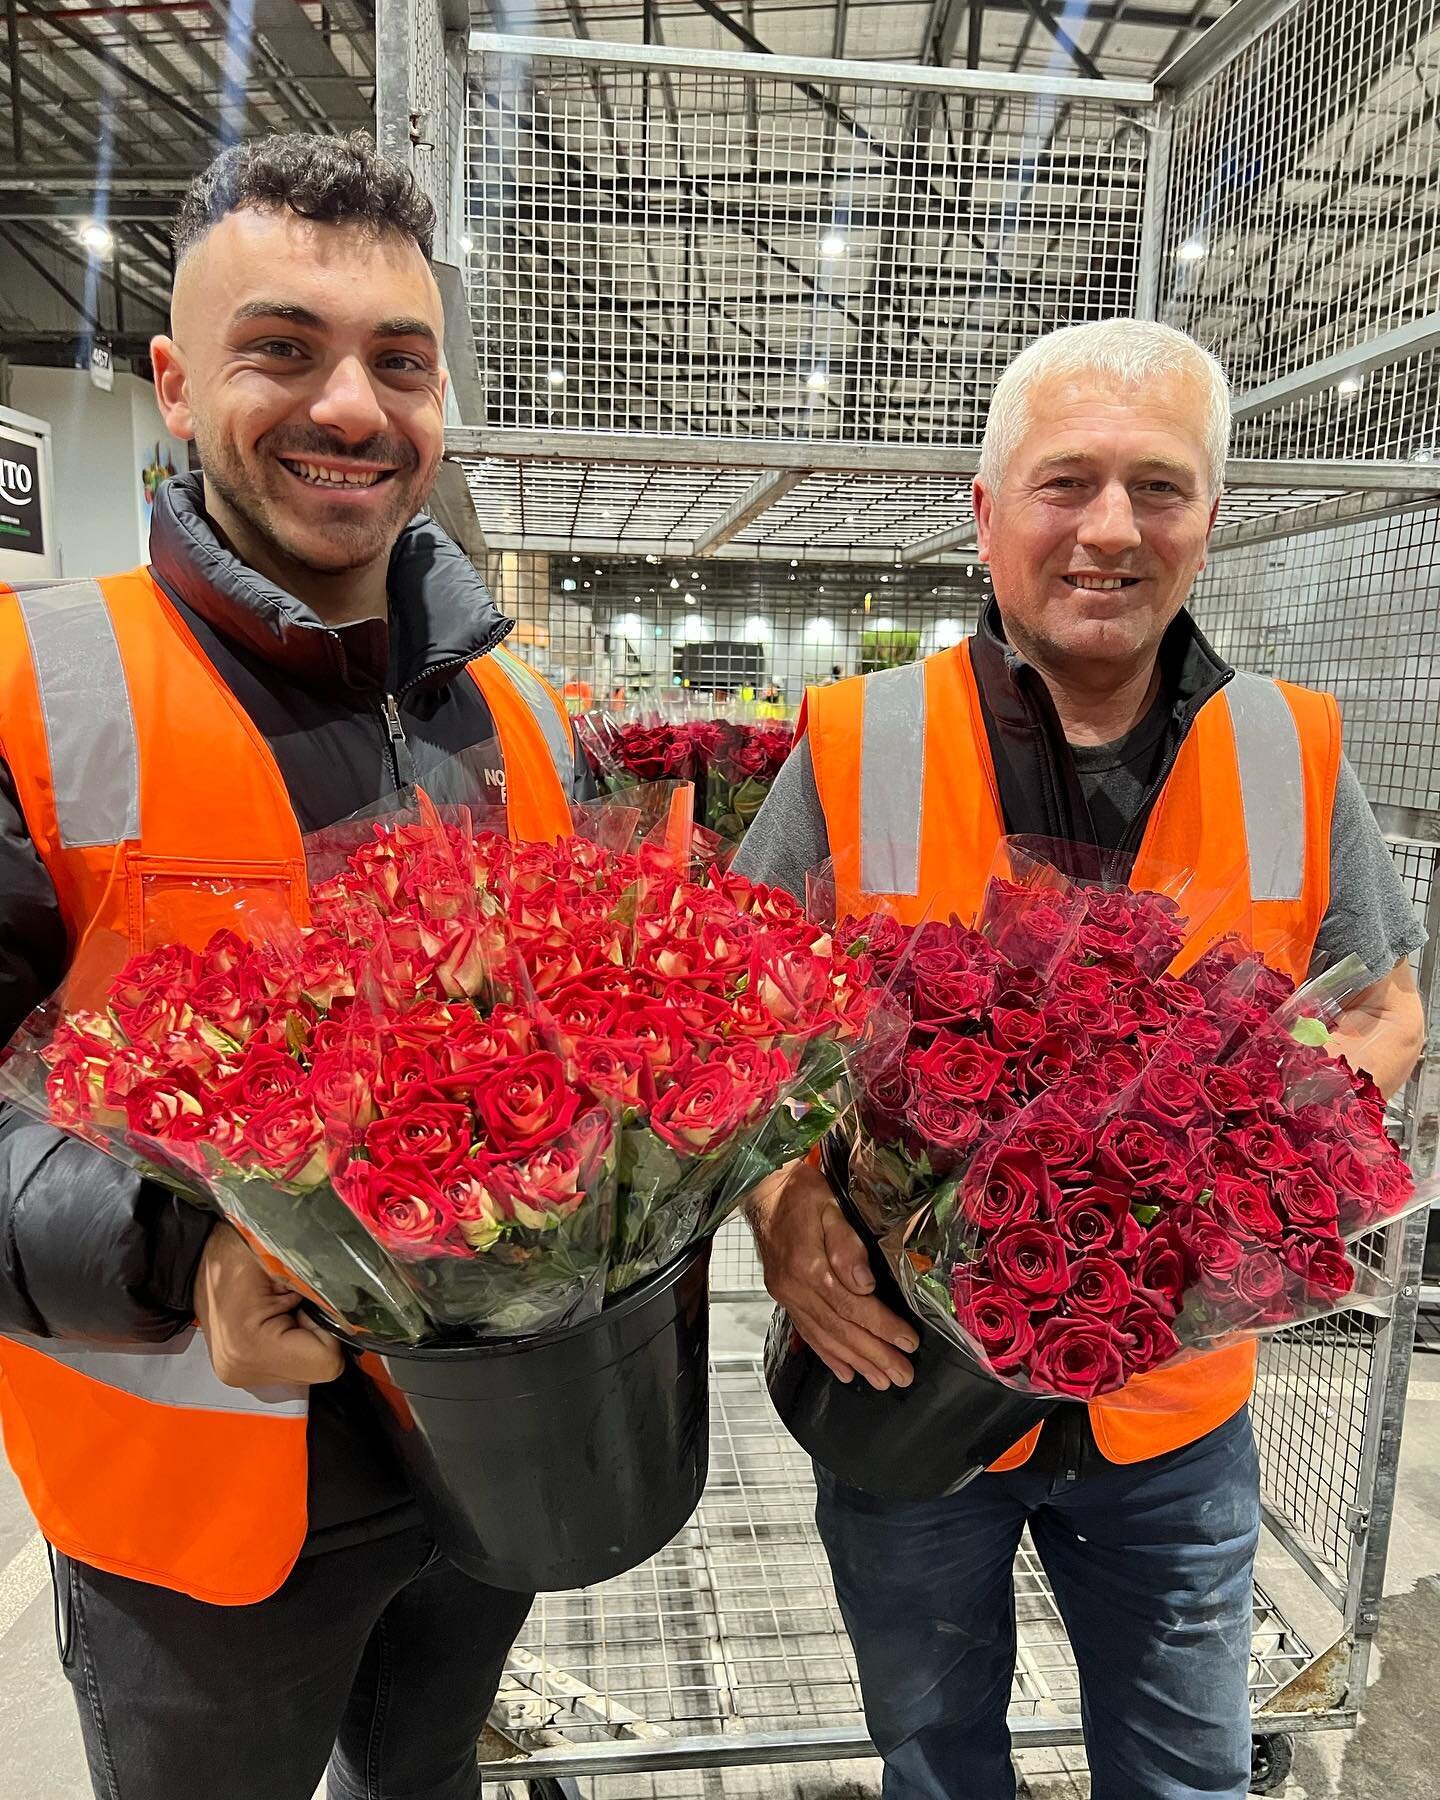 Roses only dump ❤️🌹

Look at all the roses we have on display for all of our lovely customers 😍

Be sure to pre order your flowers for VDAY. 

Email: 
📧 sales@halitflowers.com

Locations:
📍 Farm: 95 Devon Rd, Devon Meadows VIC 
📍 Market: 55 Prod